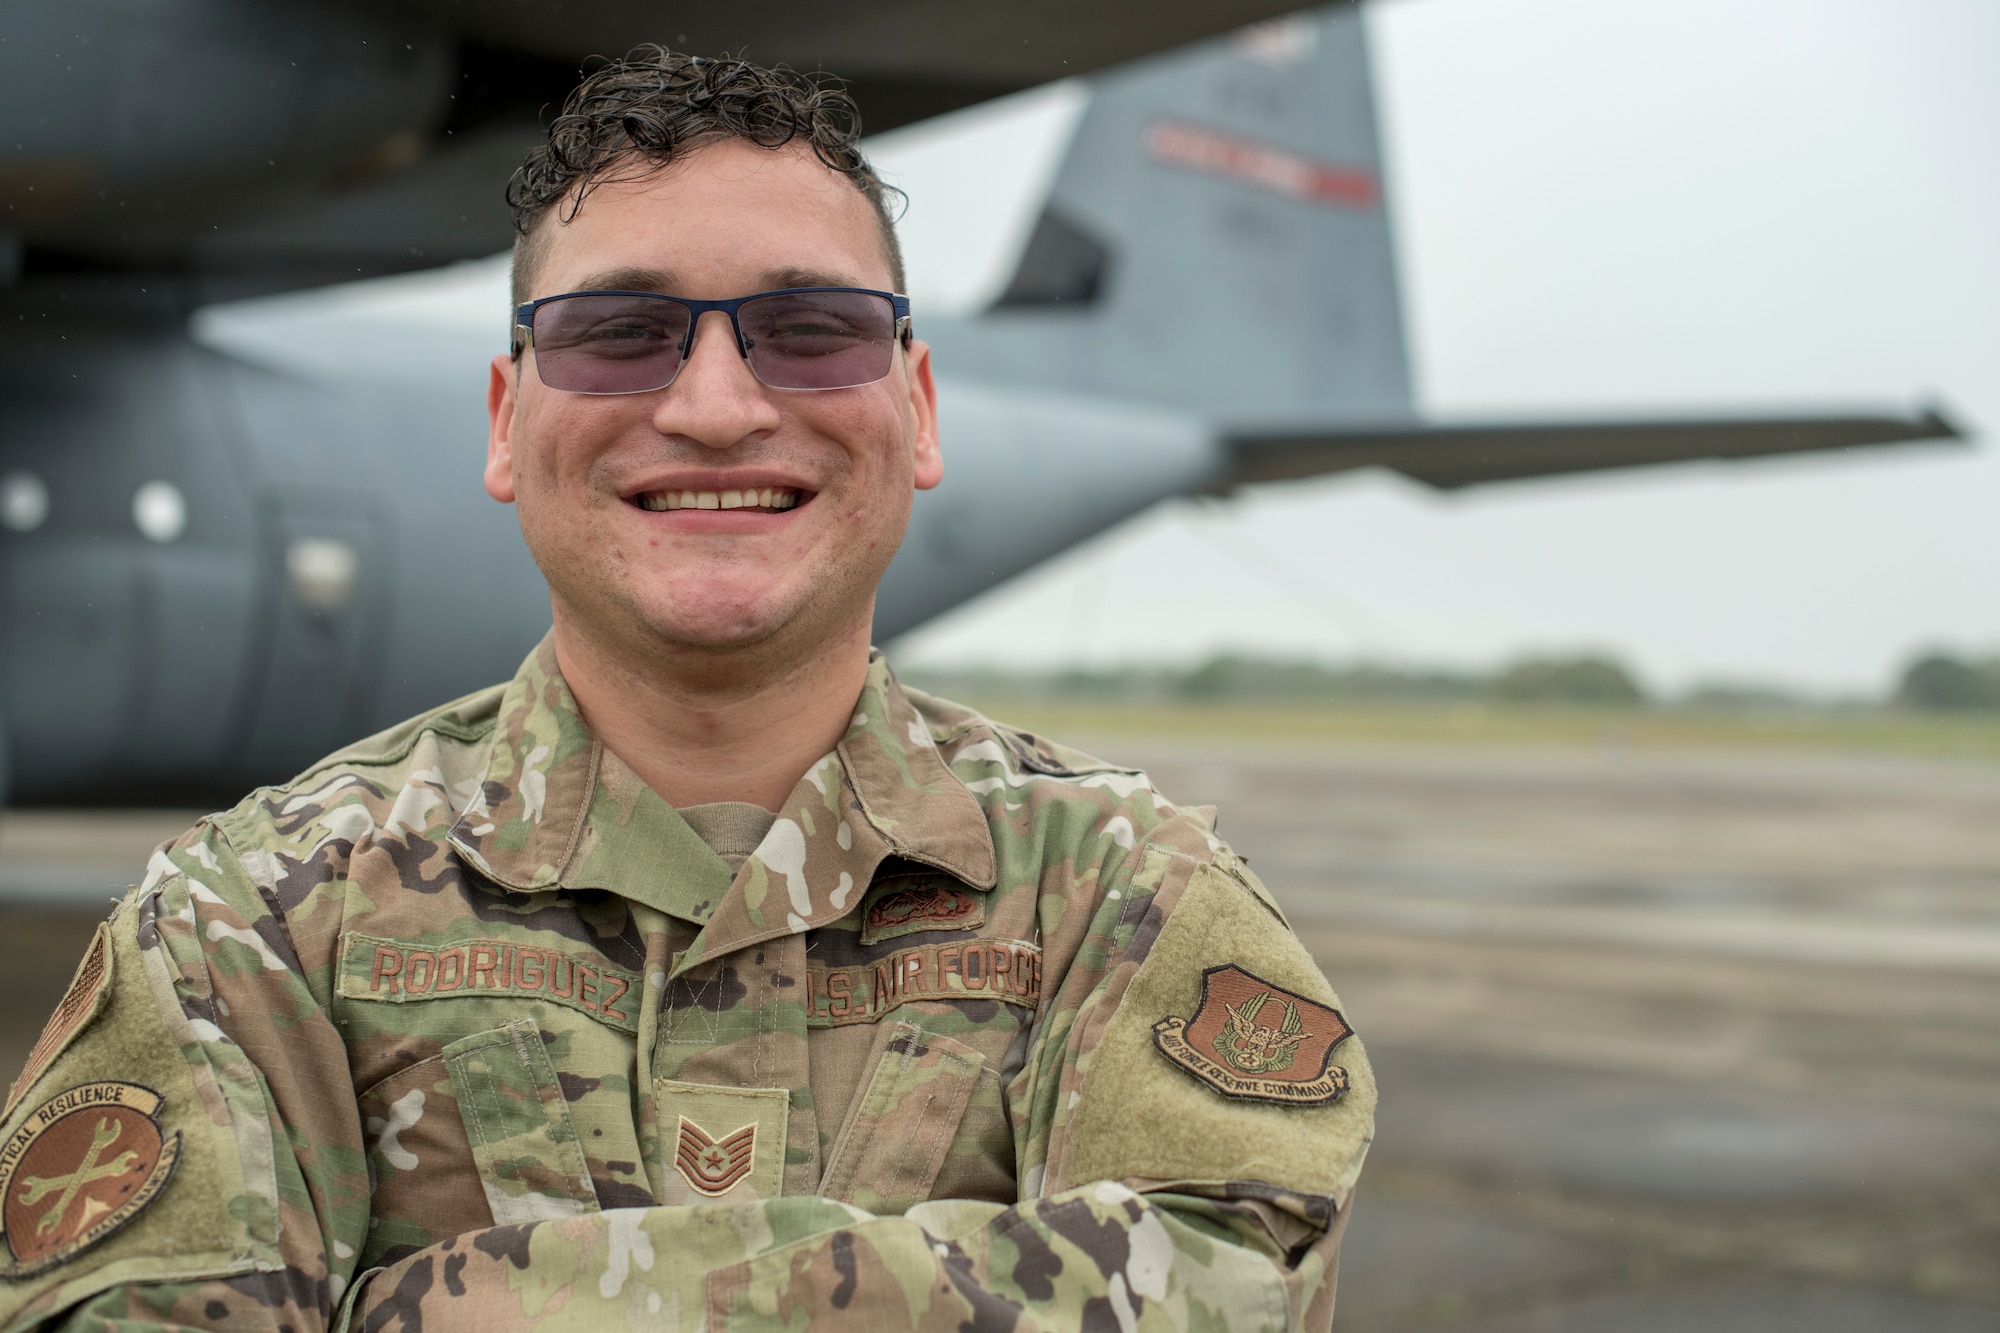 Tech. Sgt. Hector Rodriguez, an aerospace propulsion technician for the 803rd Aircraft Maintenance Squadron at Keesler Air Force Base, Miss., stands in front of one of the 10 C-130Js his squadron is in charge of maintaining March 26, 2021. Rodriguez was awarded the 2020 Air Force Reserve Comand Lt. Gen. Leo Marquez and Maintenance Effectiveness award in the aircraft maintenance civilian technician category for his work during 2020. (U.S. Air Force photo by Staff Sgt. Kristen Pittman)